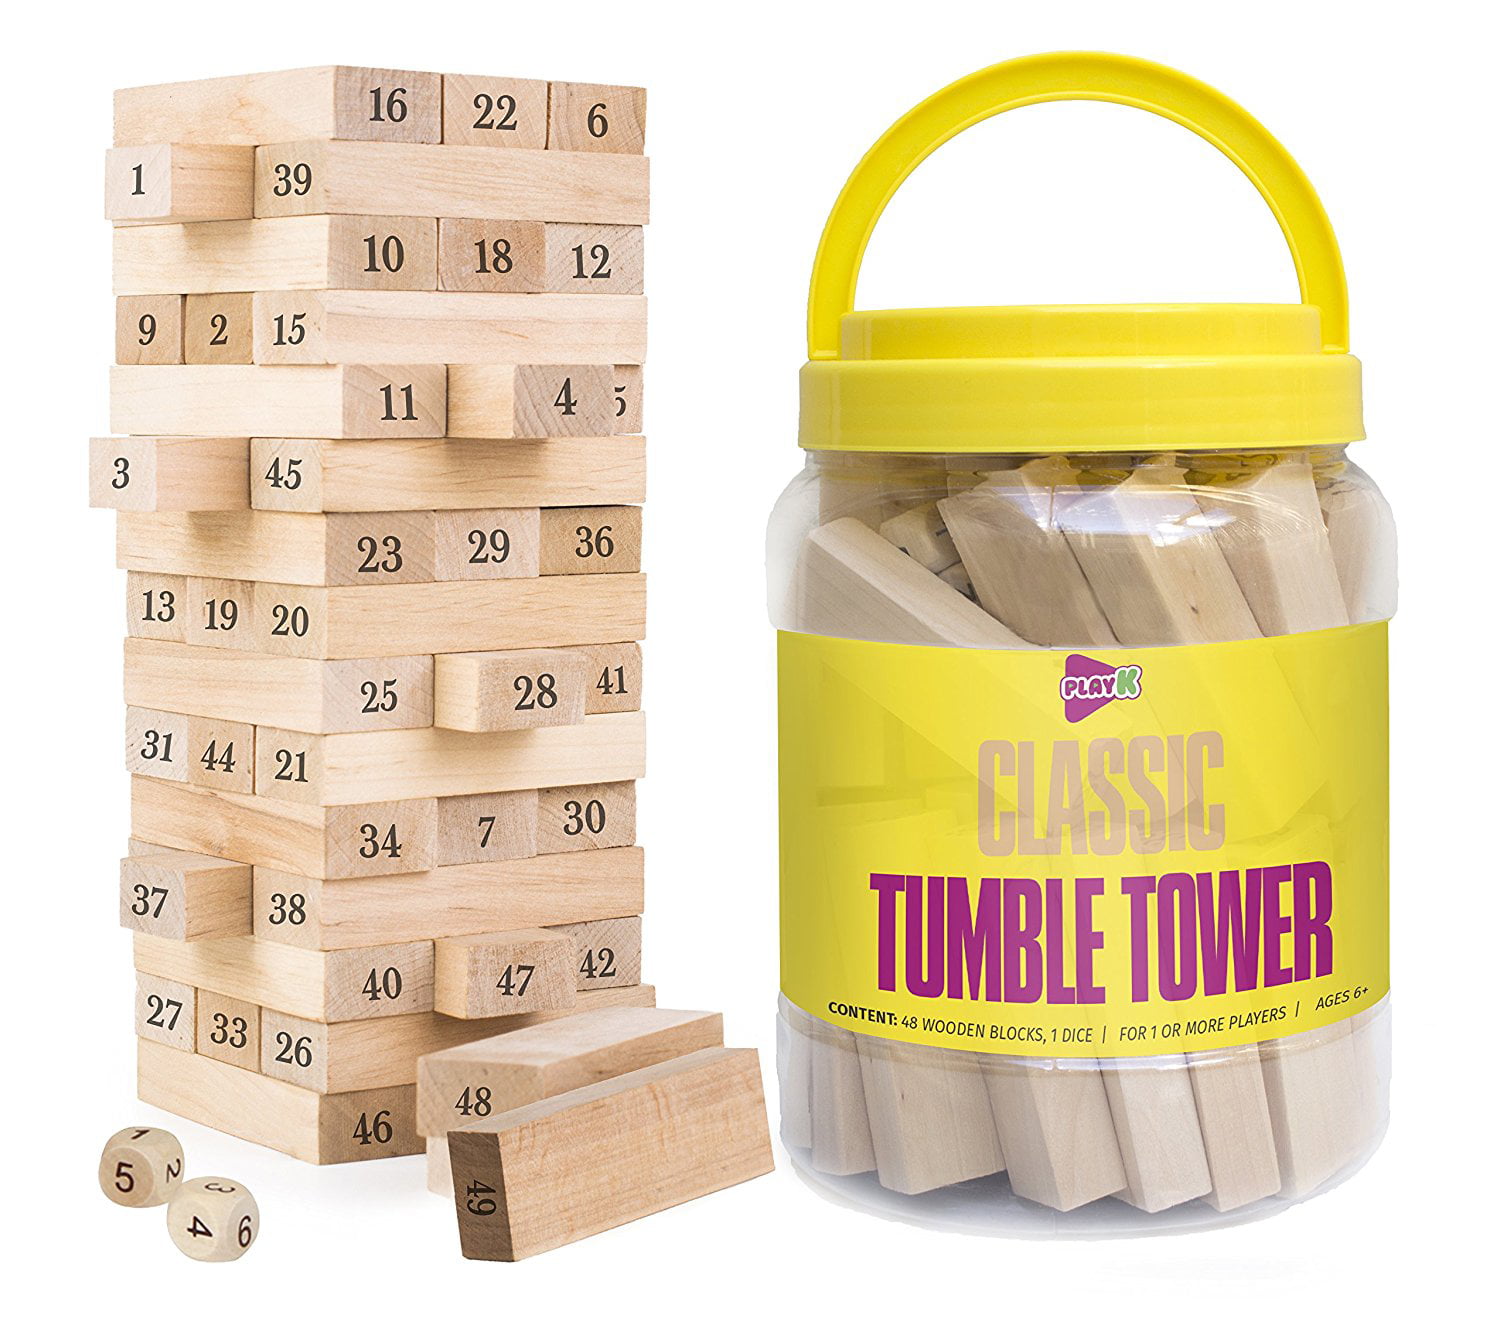 Jenga Wooden Blocks Classic Tumble Tower Generic Family Drinking Party Game...